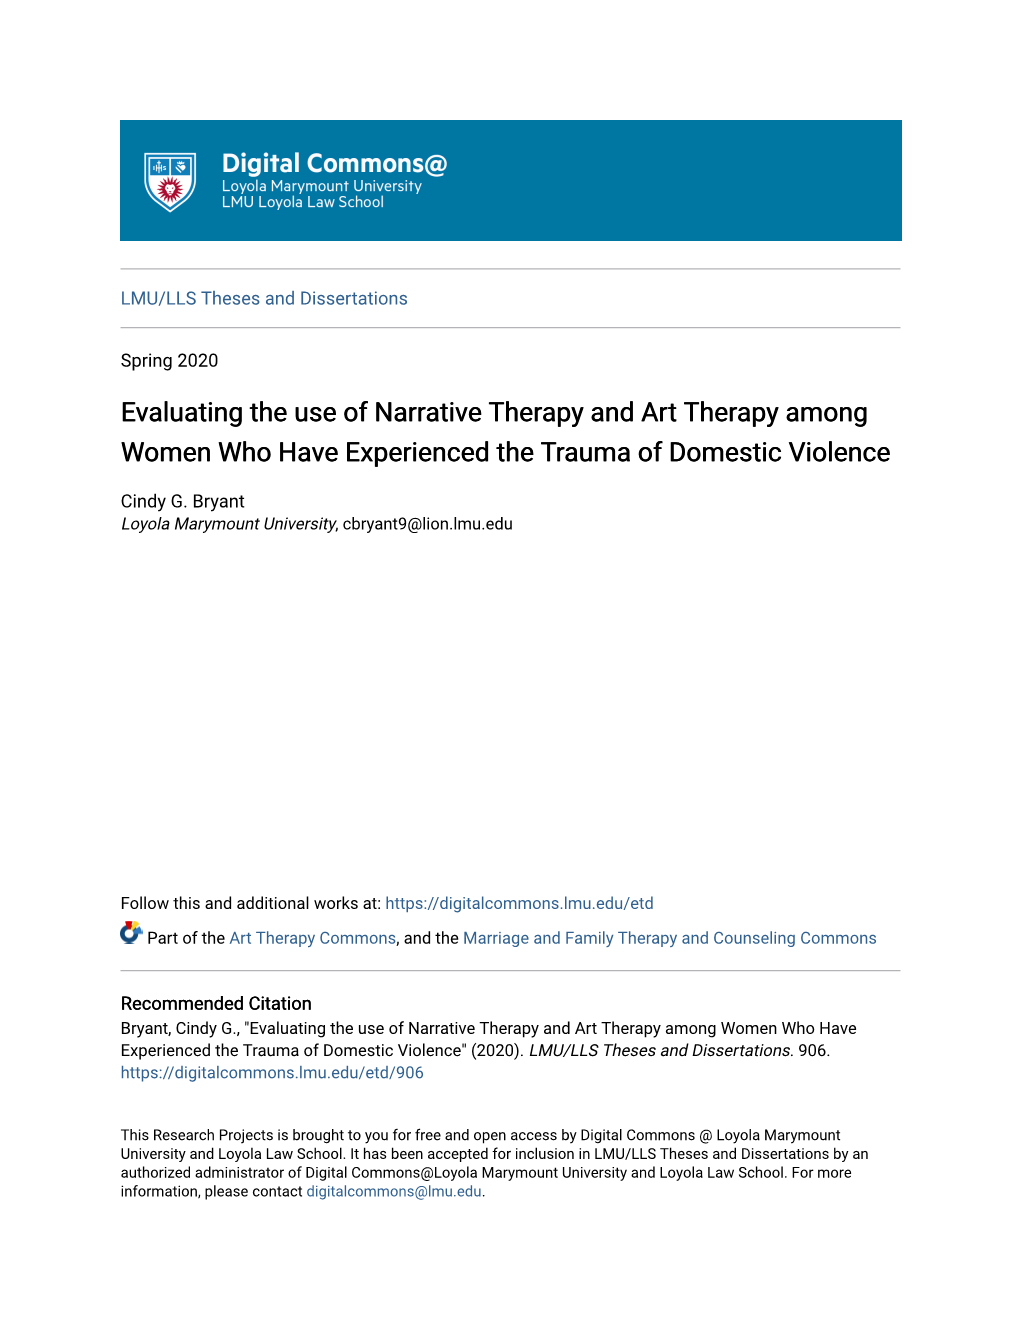 Evaluating the Use of Narrative Therapy and Art Therapy Among Women Who Have Experienced the Trauma of Domestic Violence